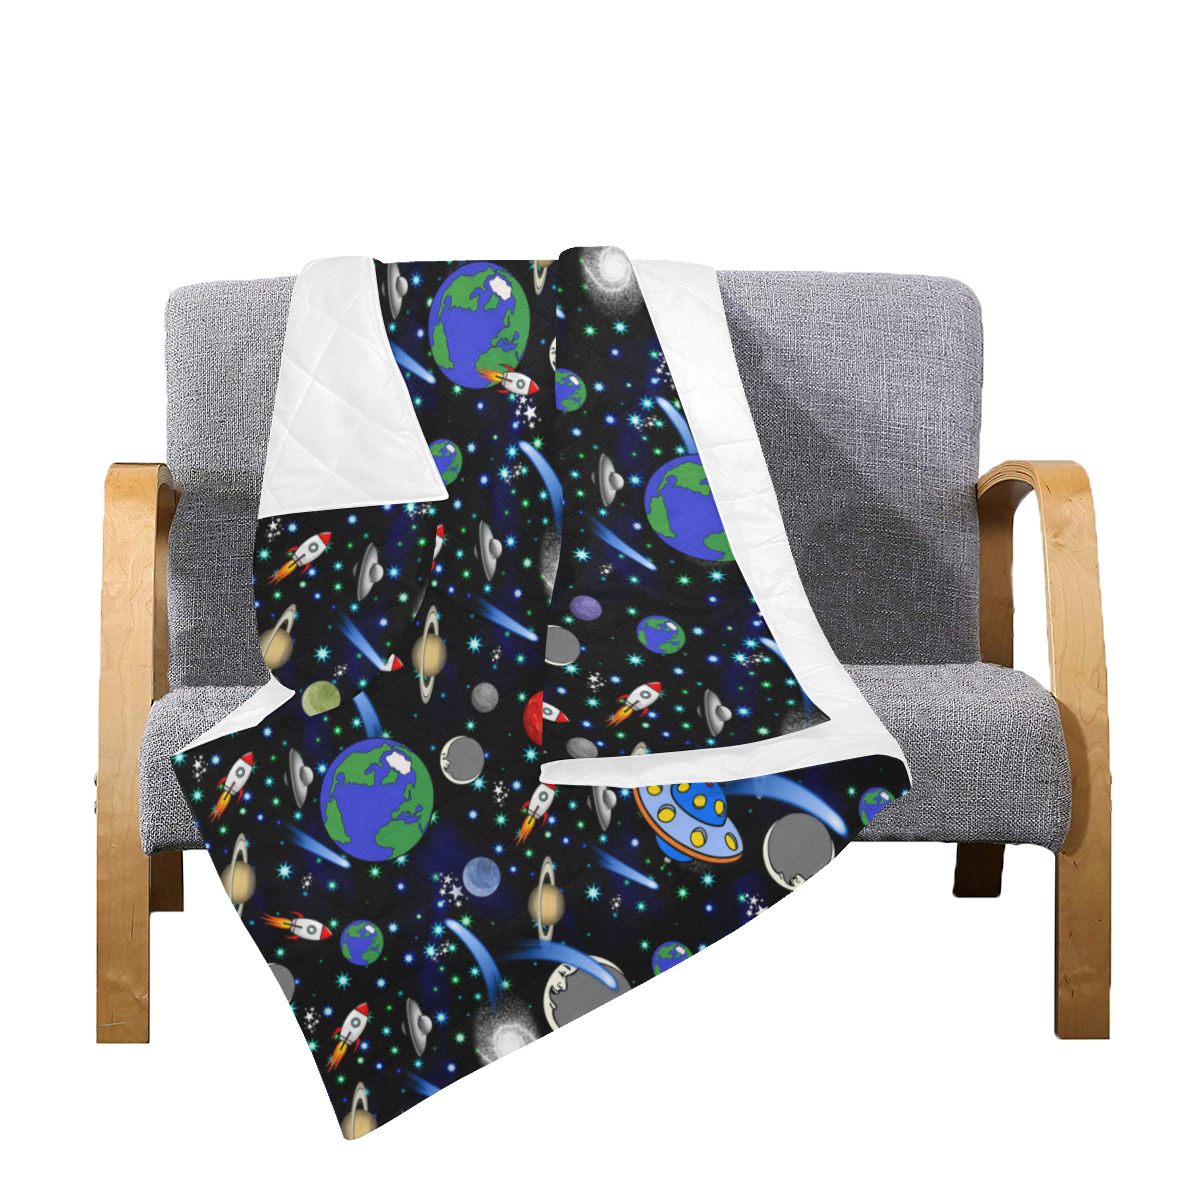 Galaxy Universe - Planets, Stars, Comets, Rockets Quilt 50"x60"